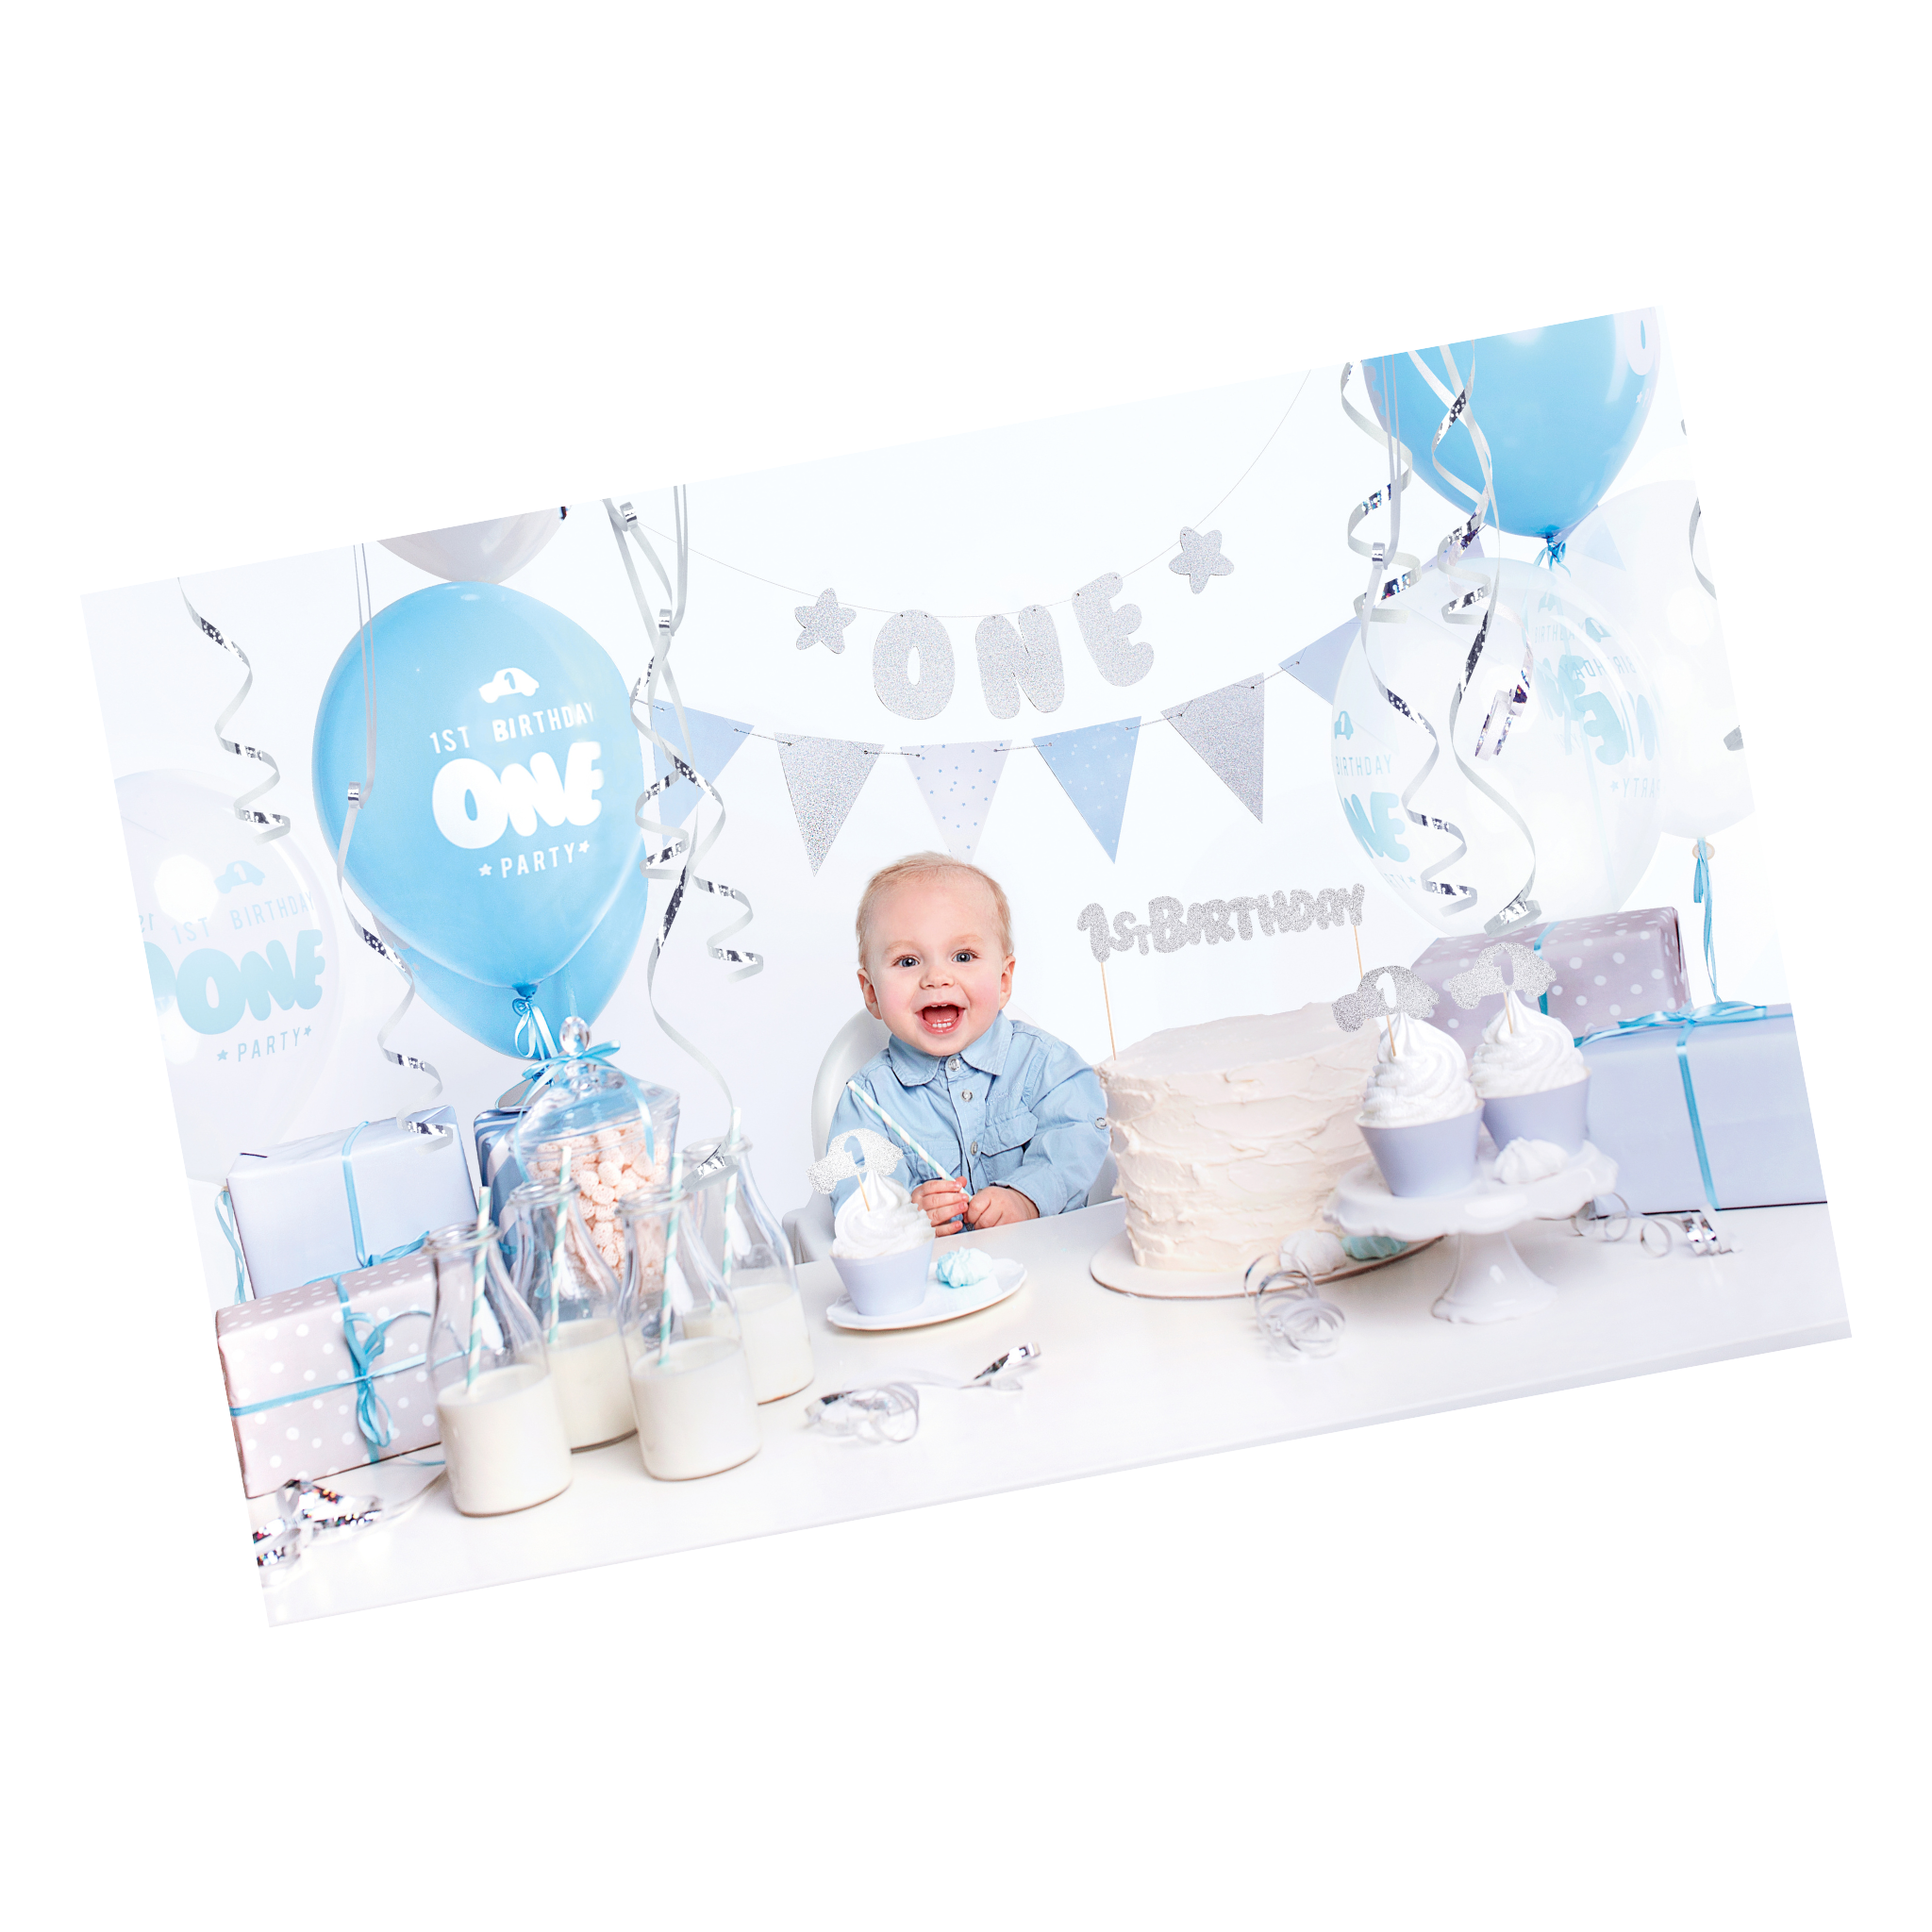 1st Birthday Decorations Set - Blue and Silver Theme